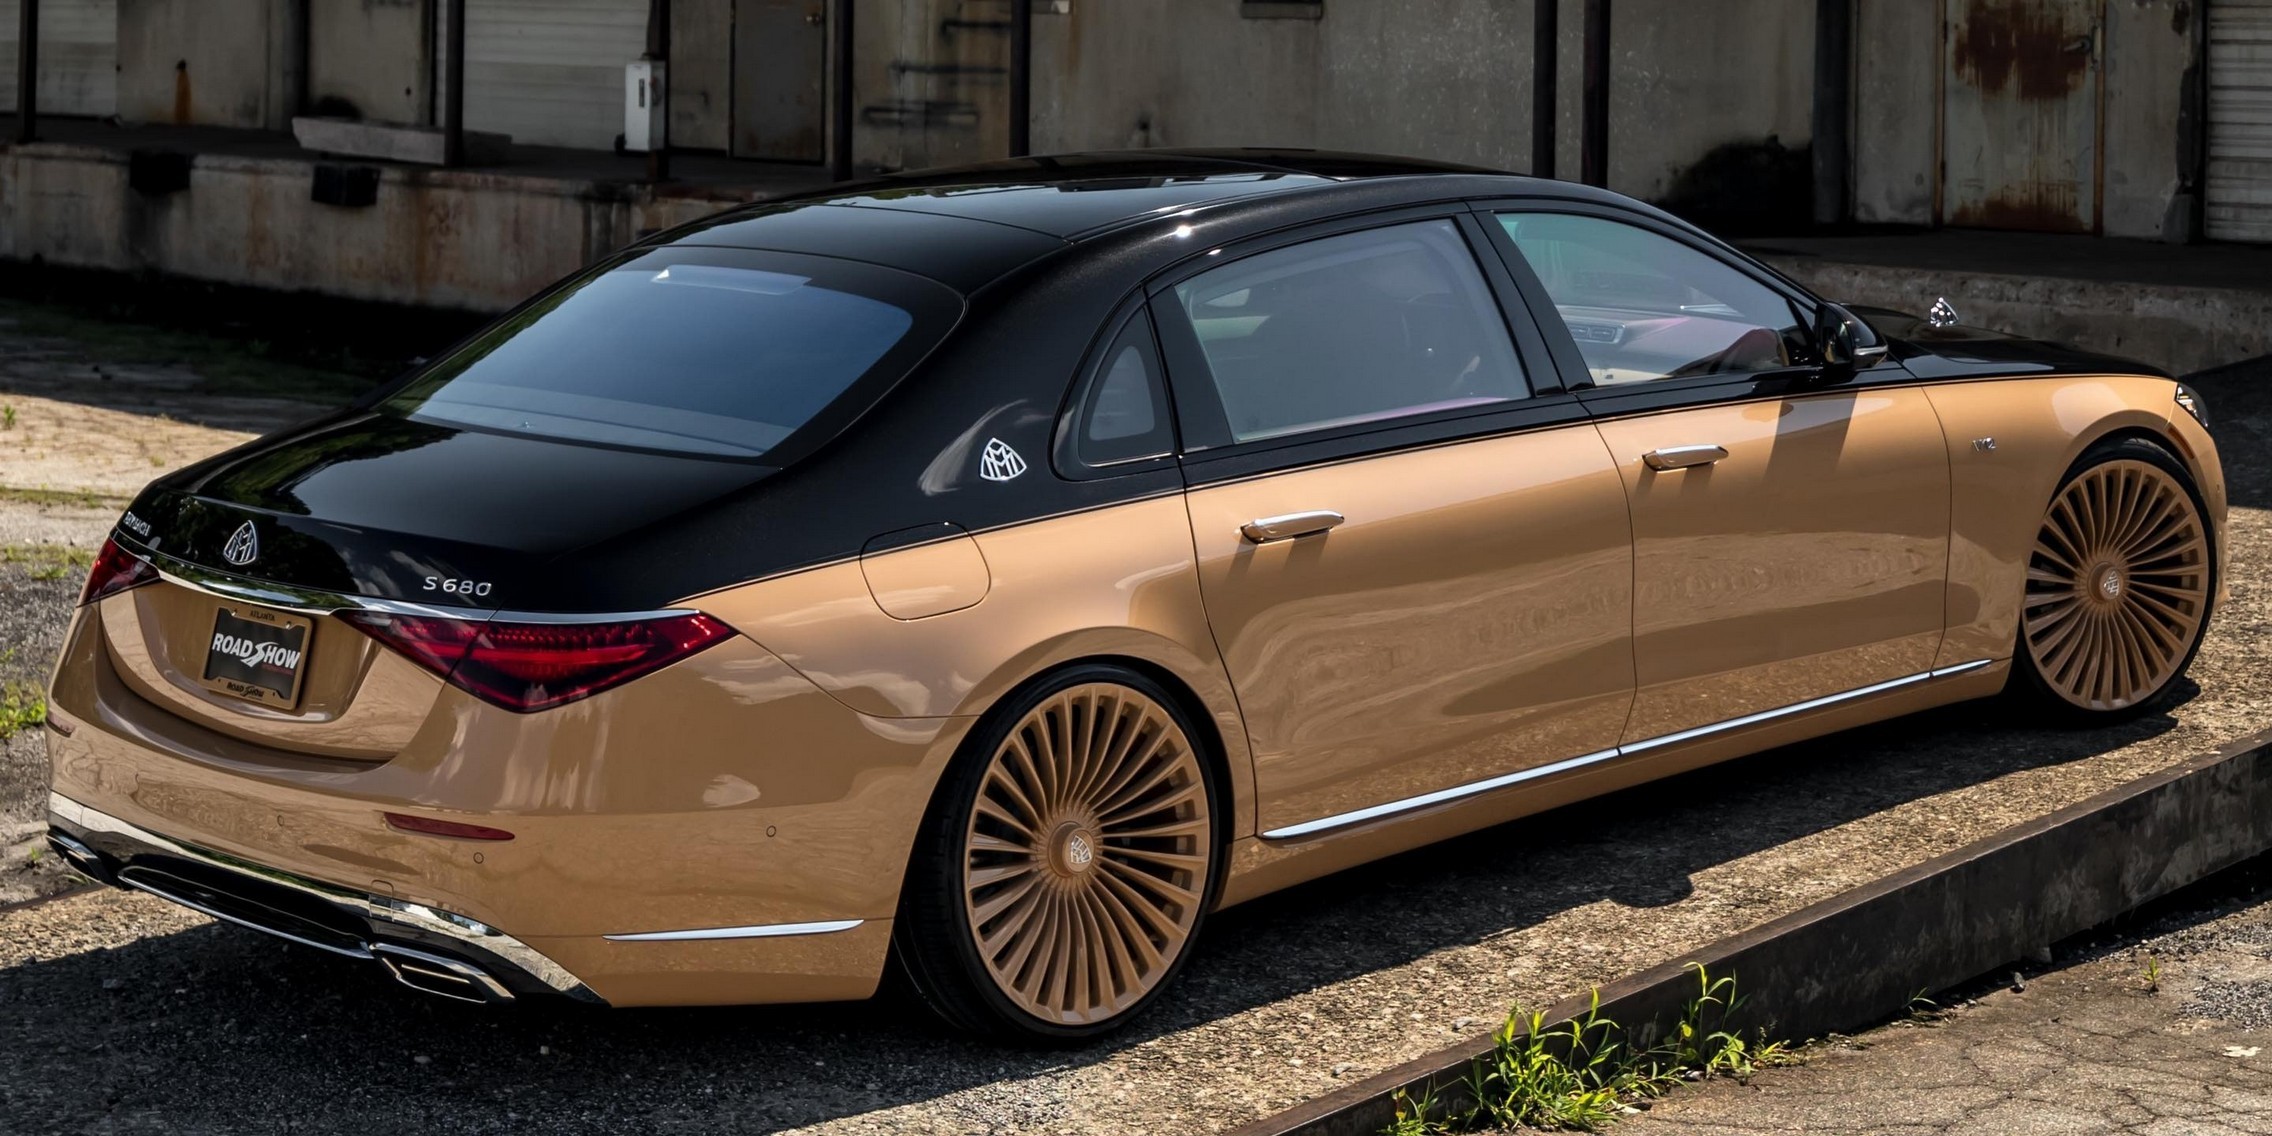 Mercedes-Maybach S-Class Limited Edition Maybach by Virgil Abloh